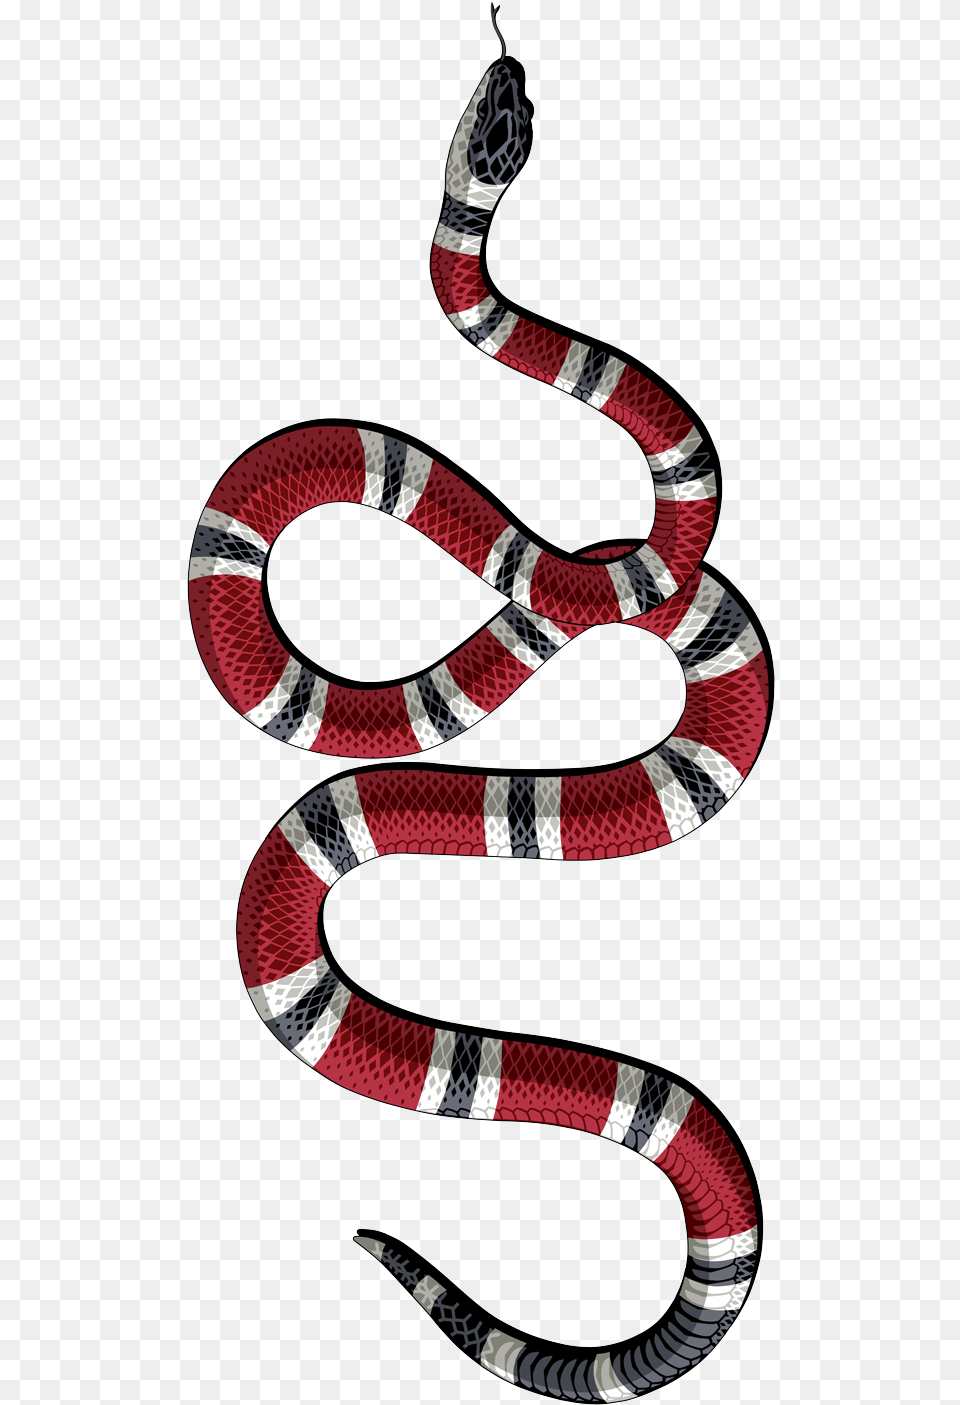 Decal Kingsnakes Gucci Sticker Serpent Photo Gucci Snake Logo, Animal, King Snake, Reptile Png Image